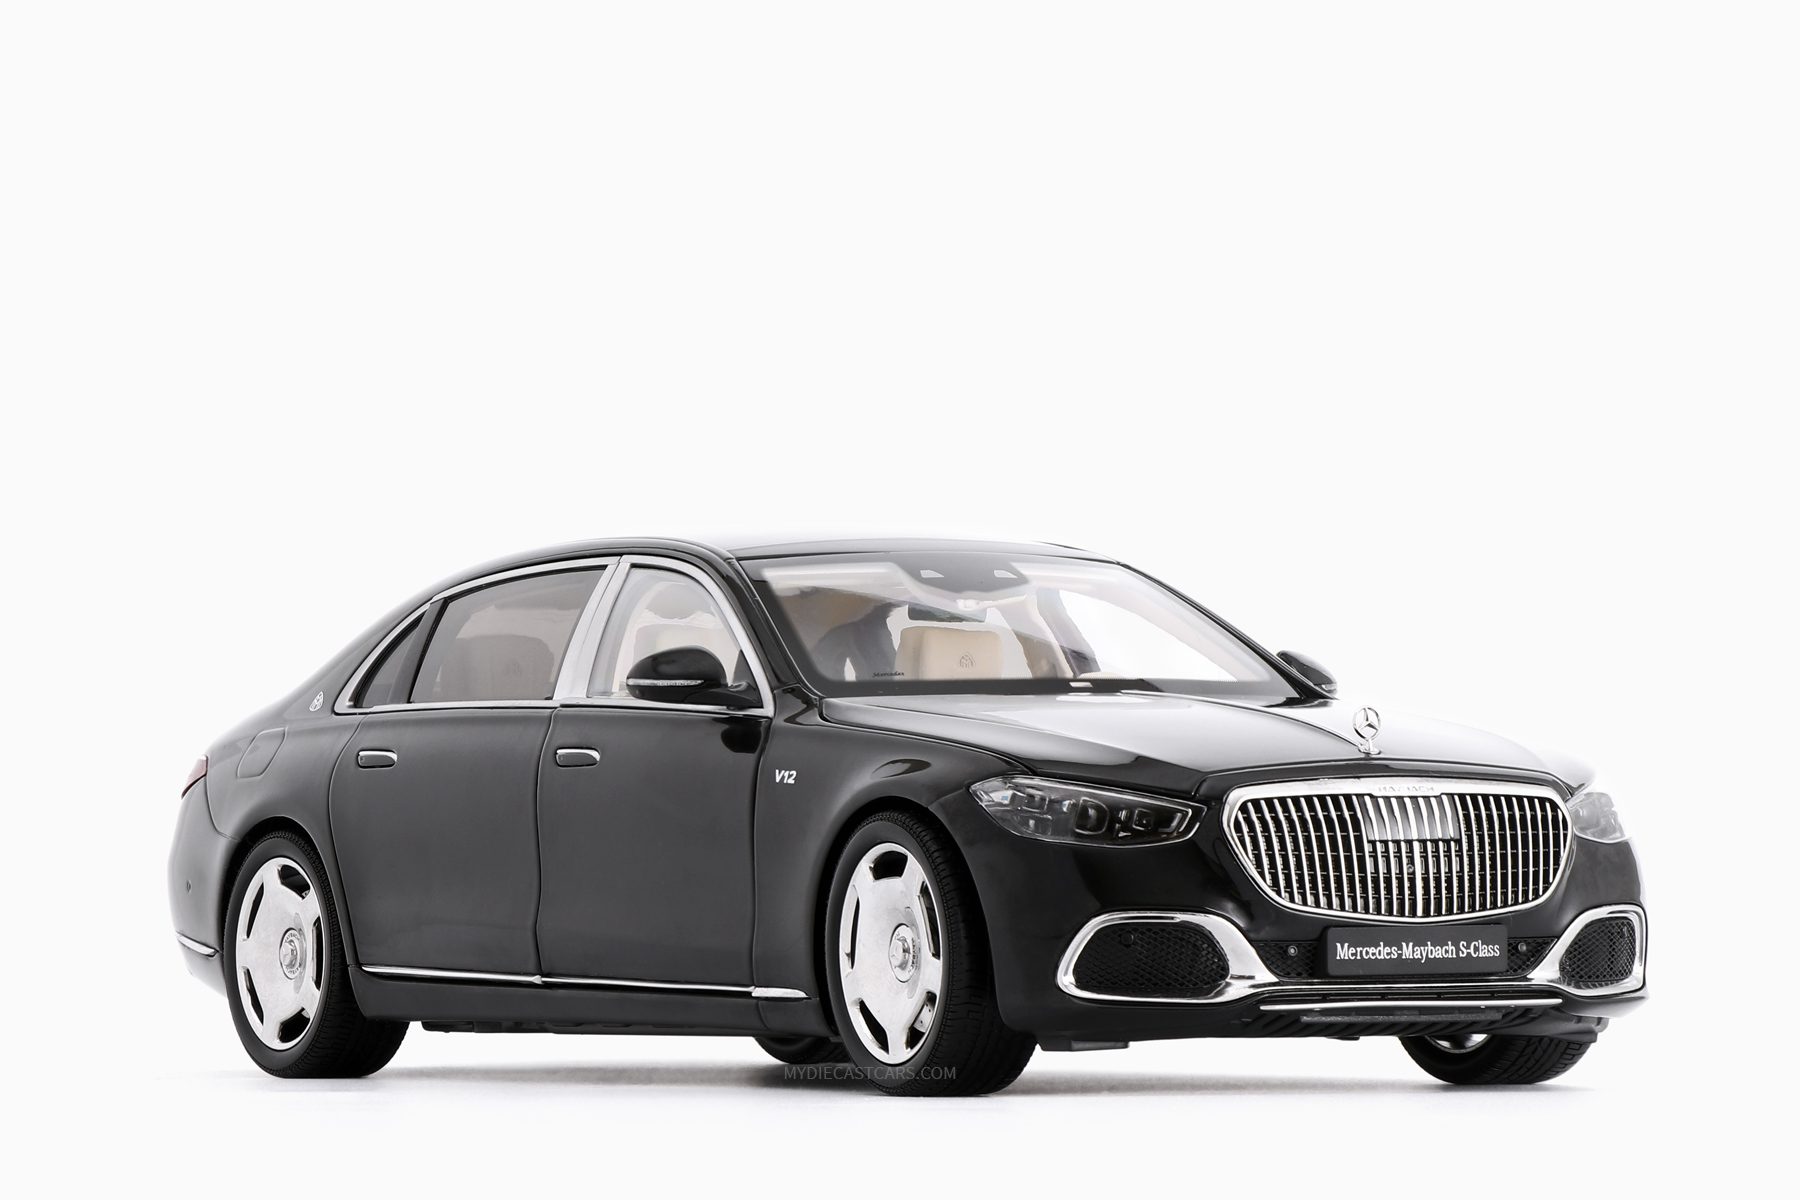 mercedes-maybach-s-class-almost-real-black-1w